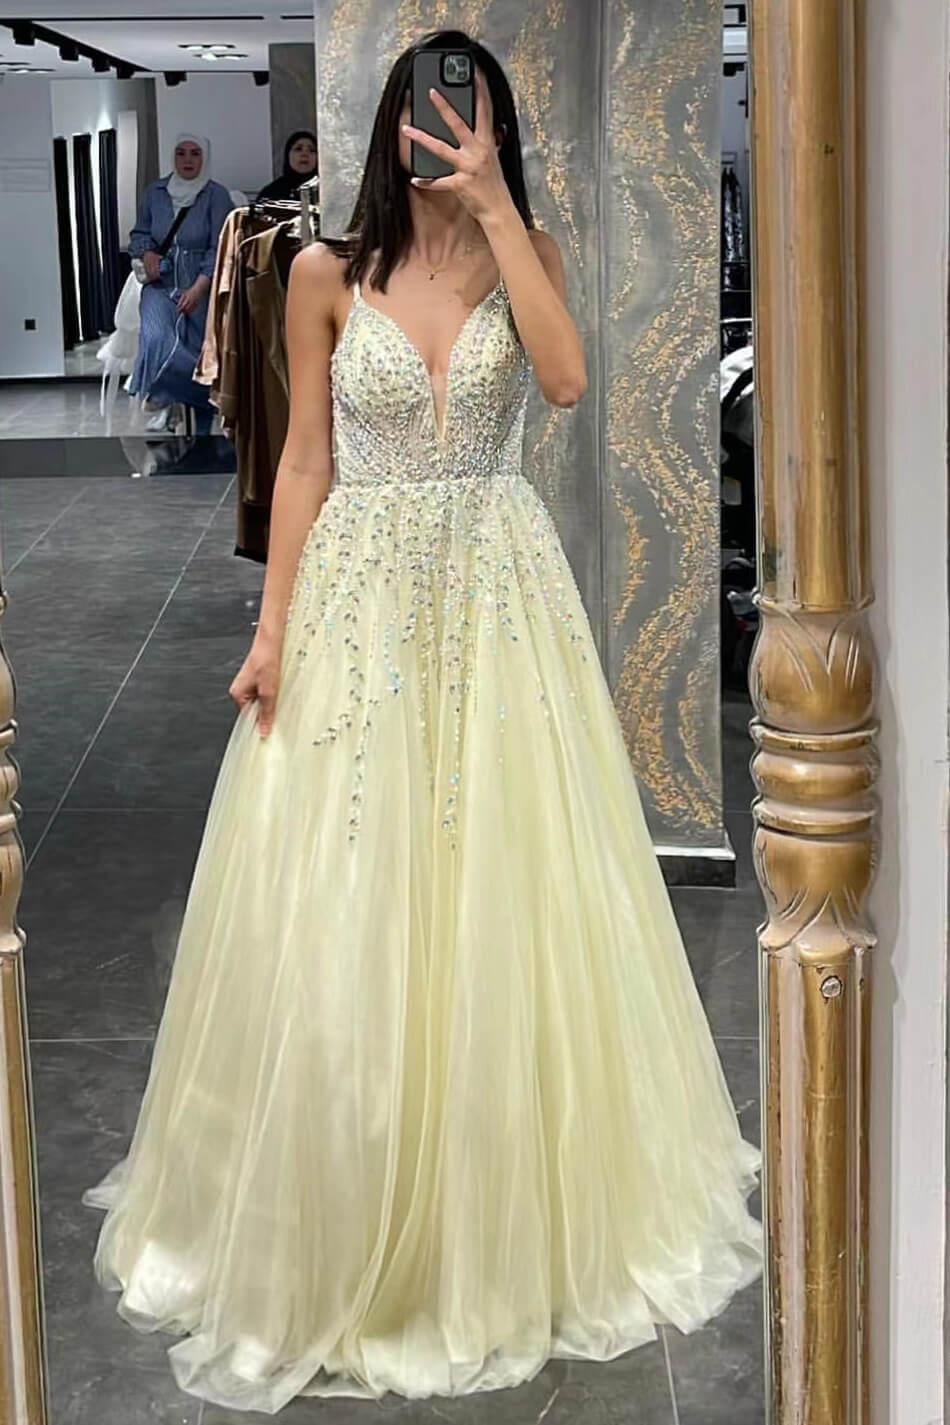 Oknass Daffodil Tulle Spaghetti-Straps Prom Dress A Line With Beadings